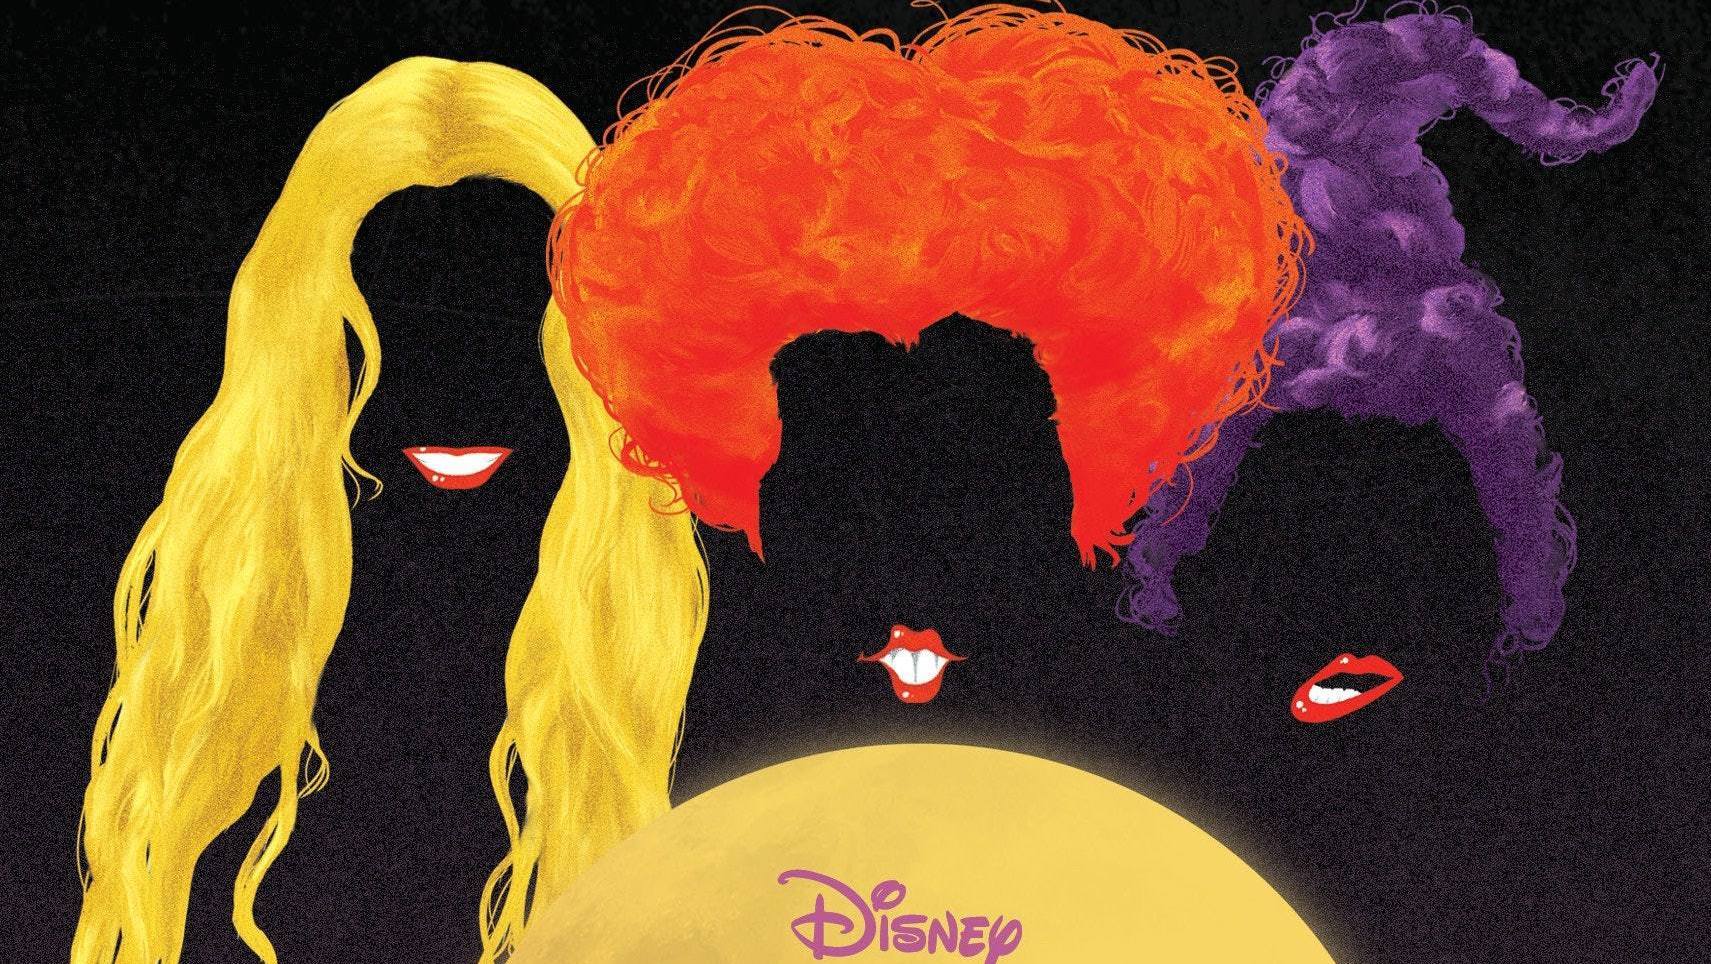 There's a New Book About Hocus Pocus and We've Got the Exclusive Cover Art and an Excerpt